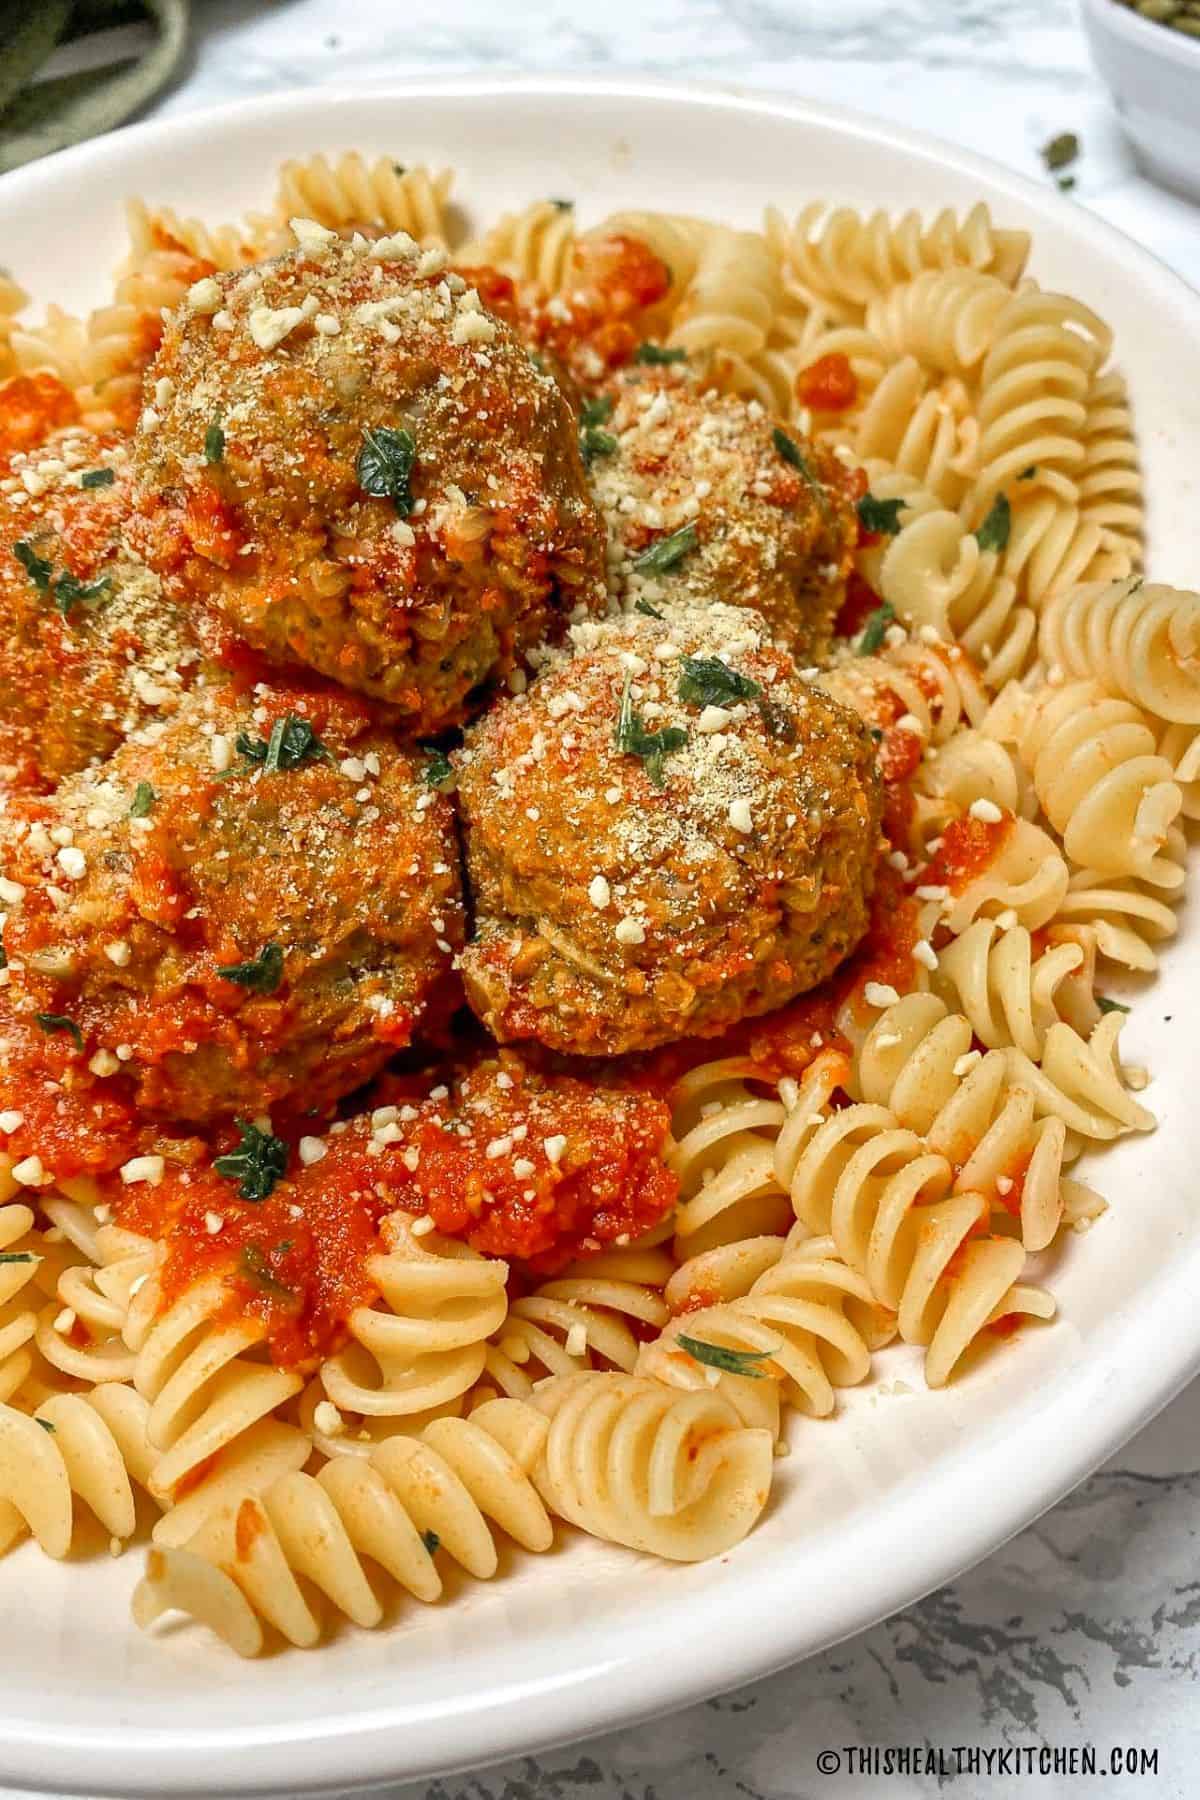 Plate of pasta with tomato sauce and meatballs on top.